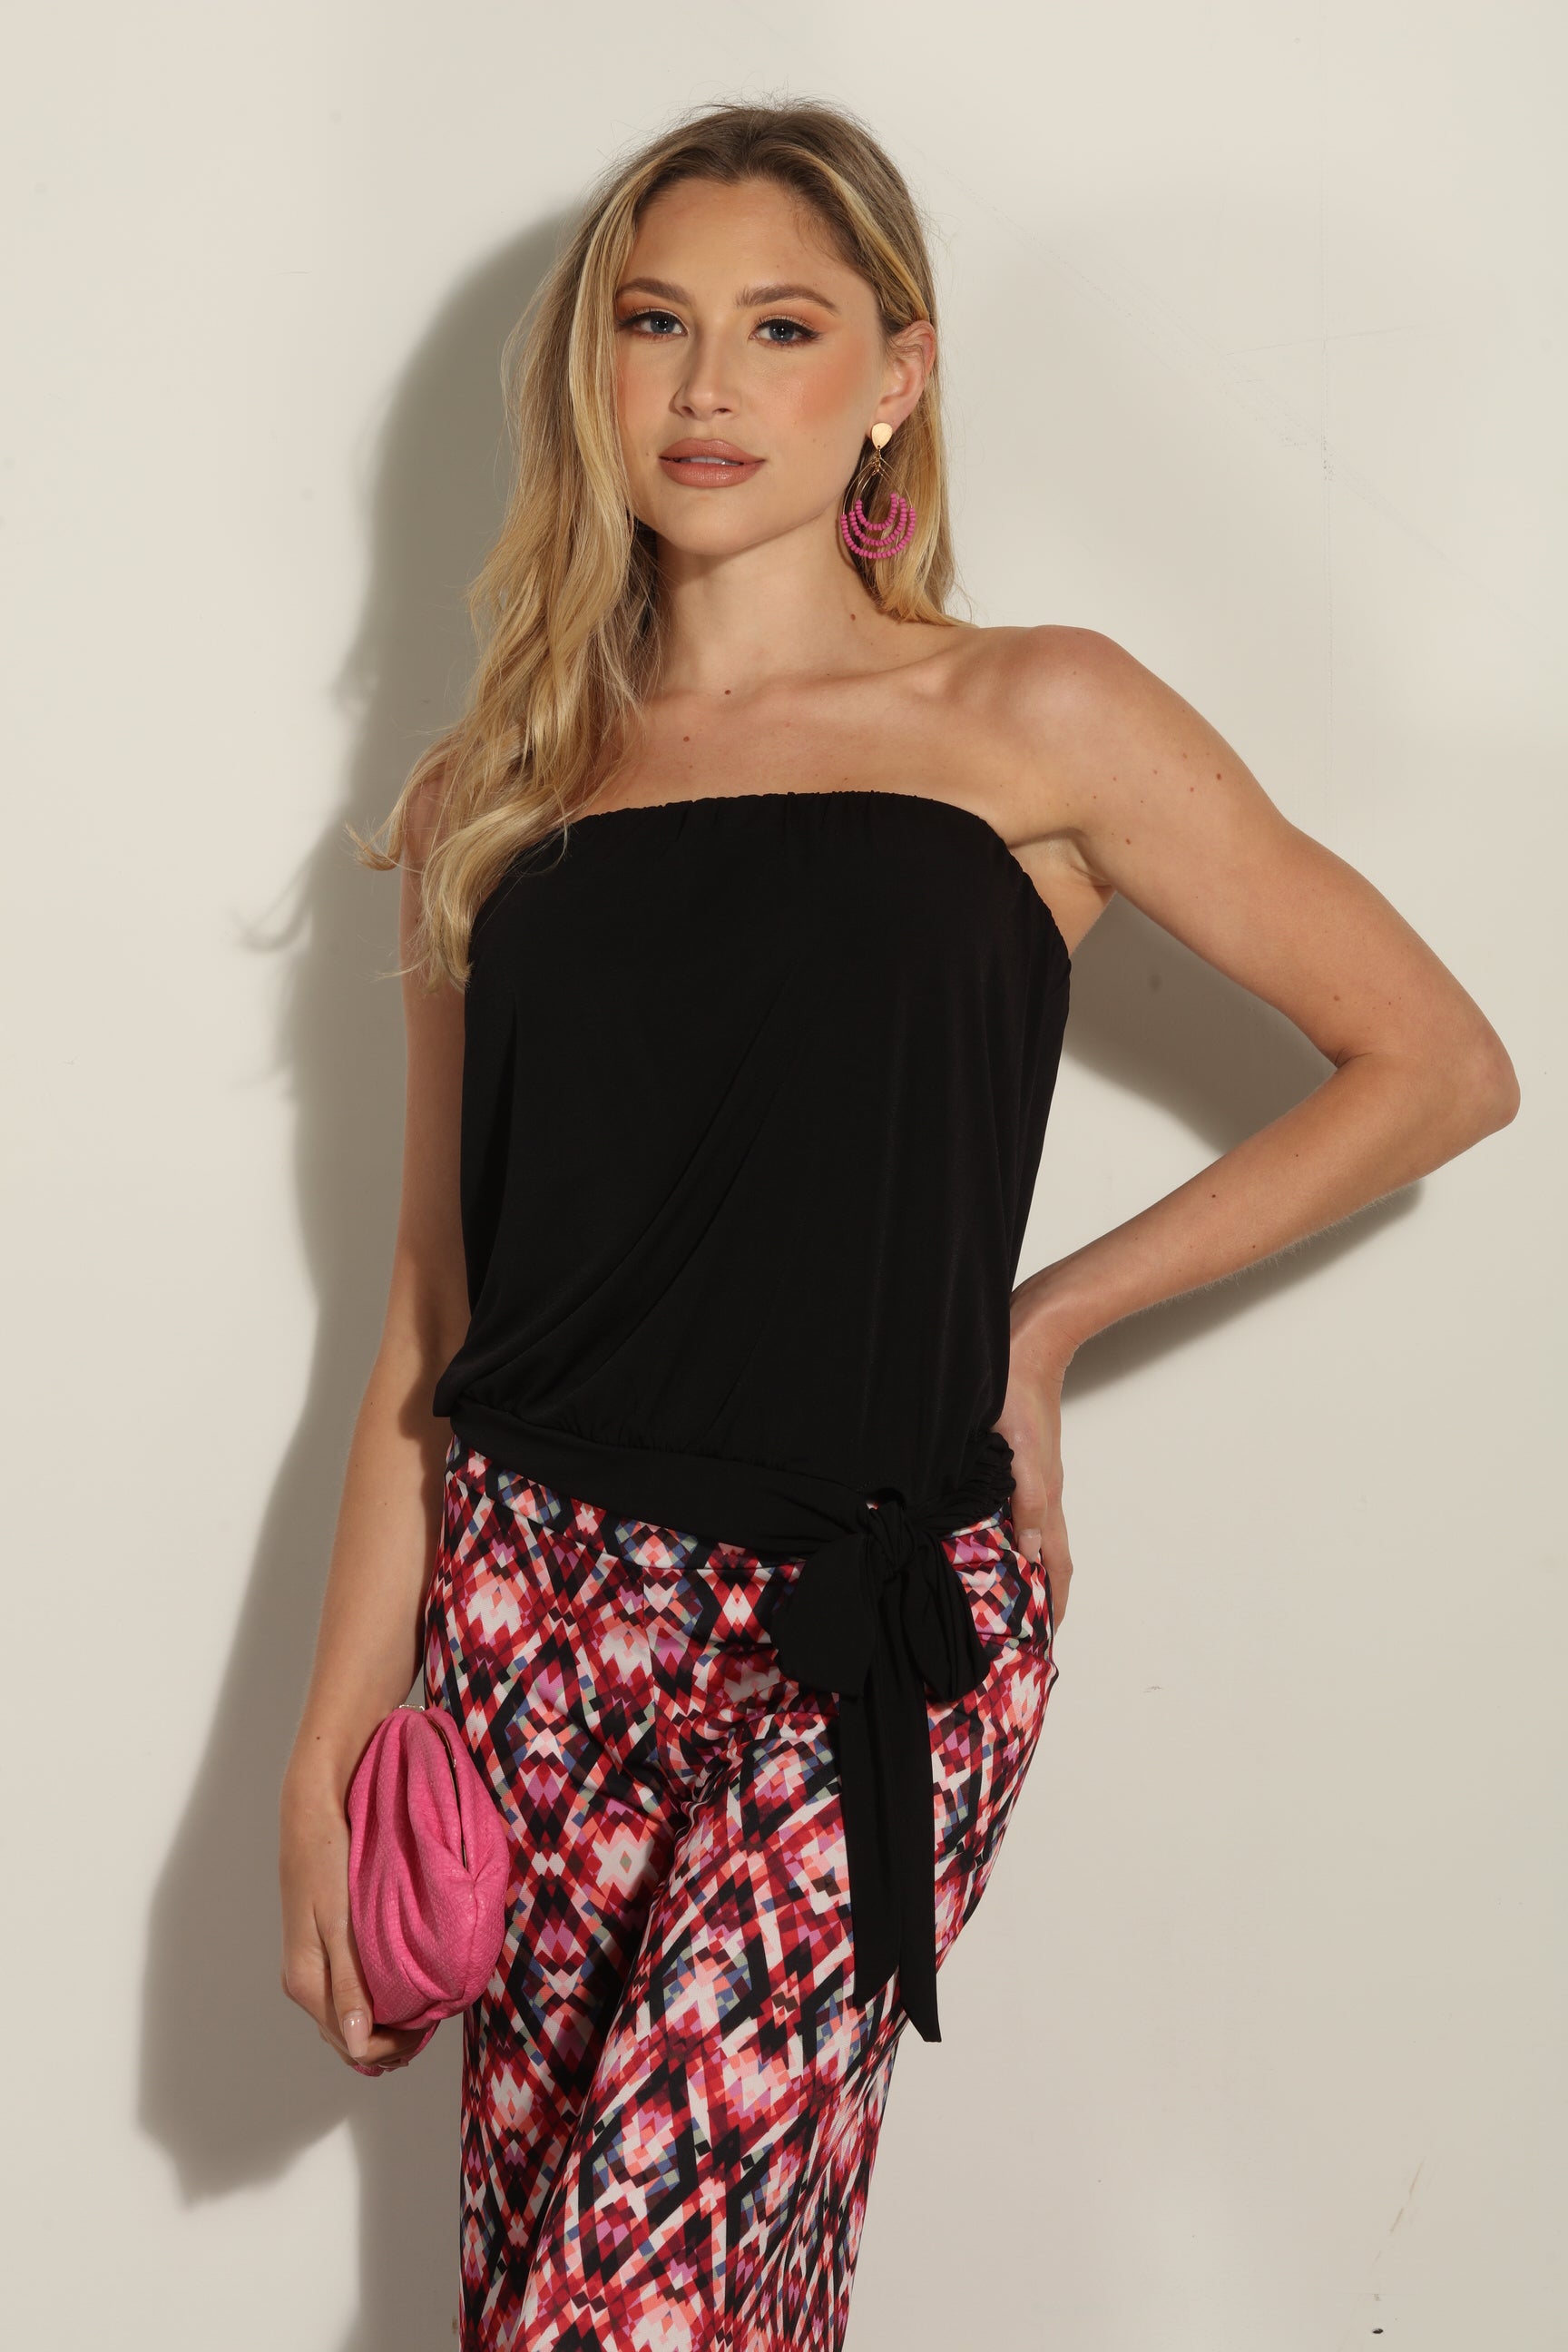 Black Stretch Tube Top with Tie - BEST SELLER